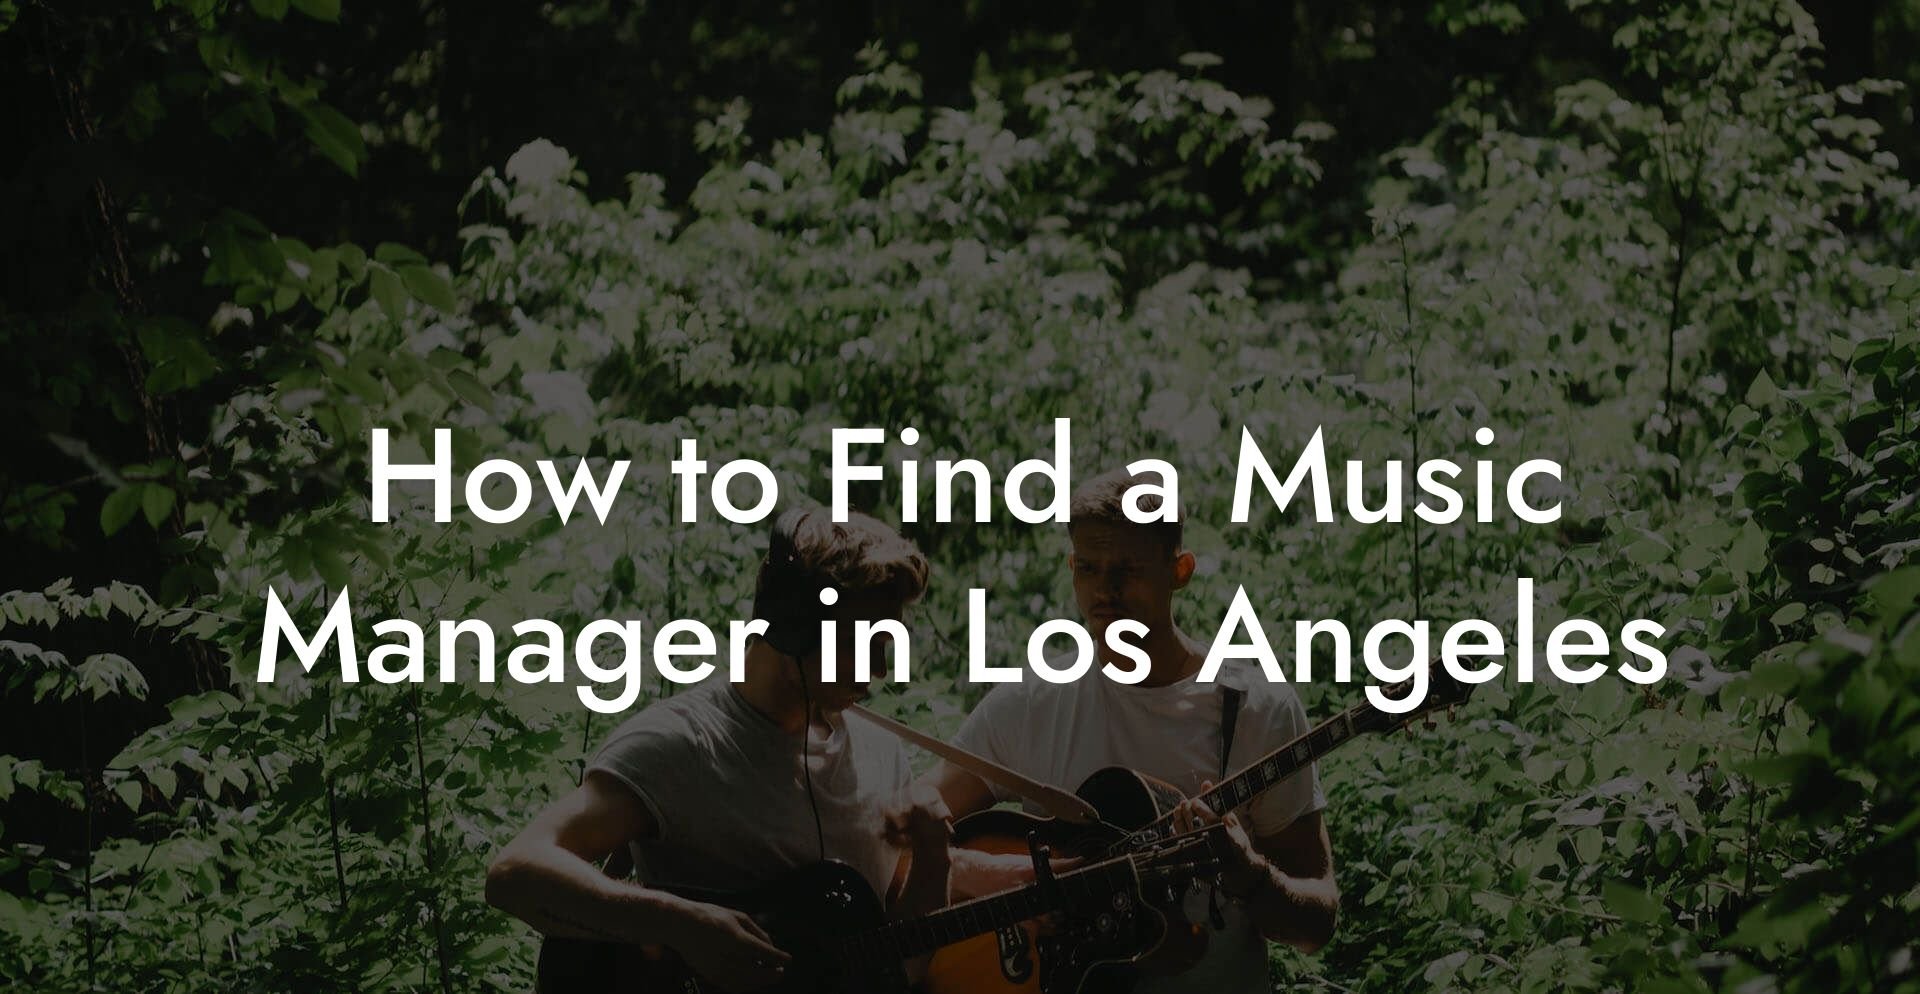 How to Find a Music Manager in Los Angeles